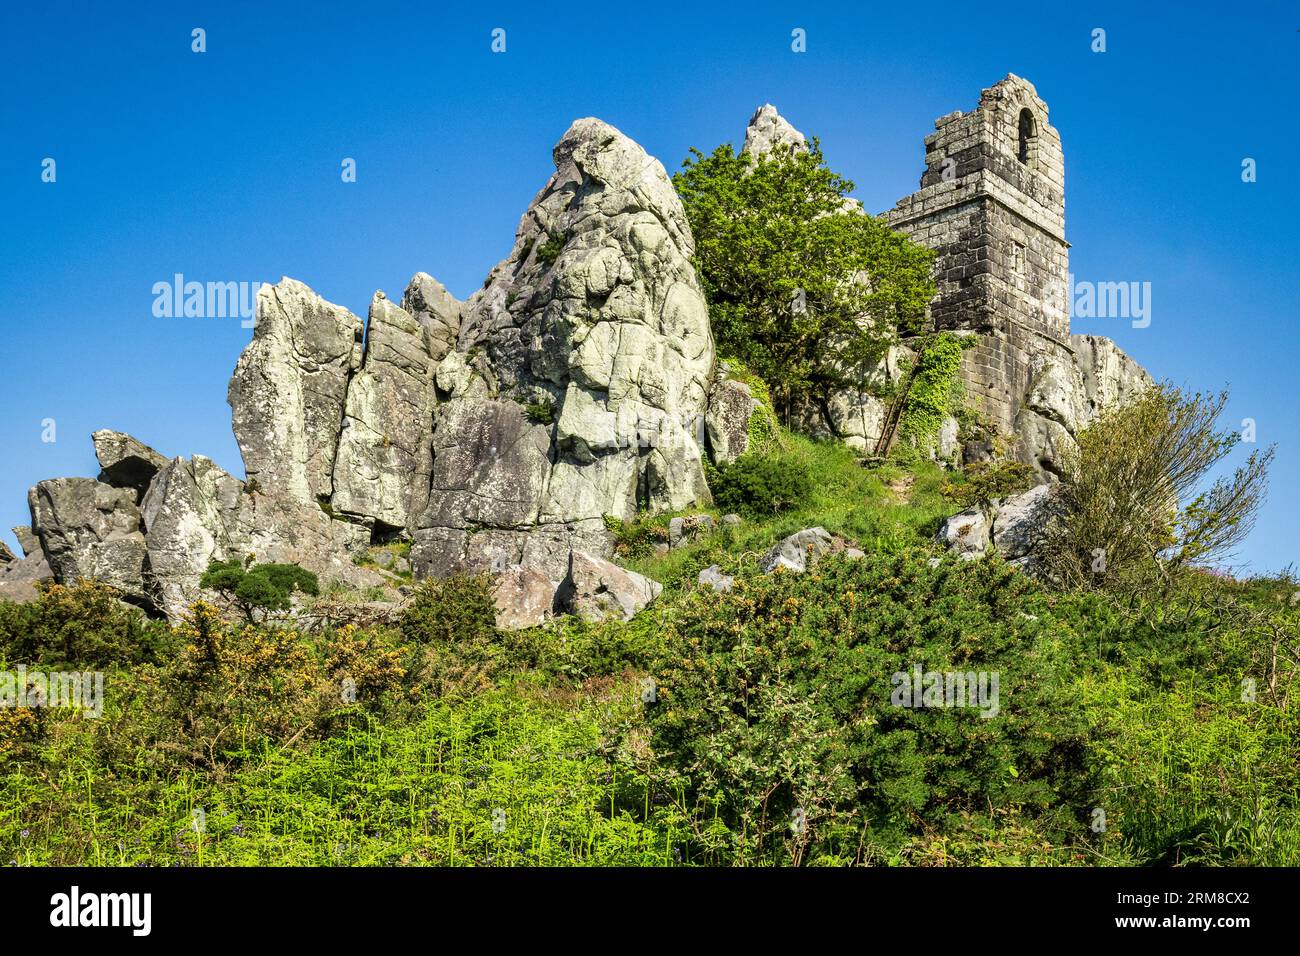 Ruins of the Chapel of St Michael, Roche Rock, Cornwall, on a clear day in May with stunning blue sky. The rock and chapel are believed to have... Stock Photo